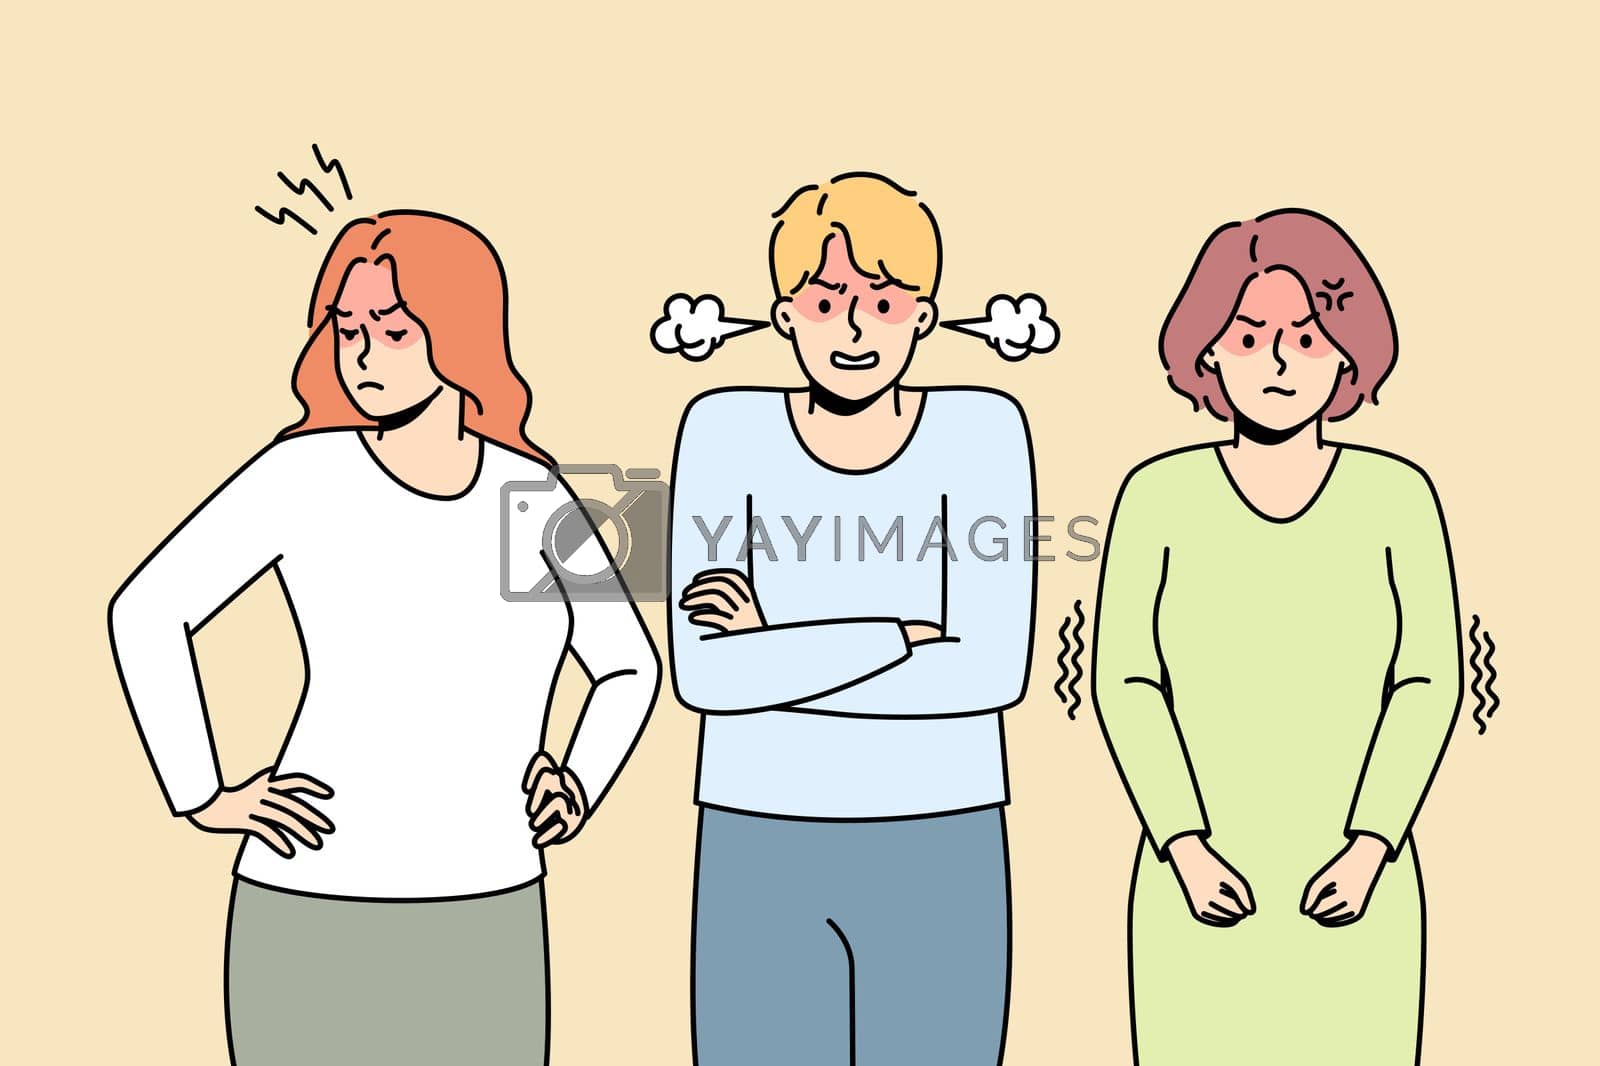 Royalty free image of Girls, guy can not agree, come to decision that suits everyone. by VECTORIUM